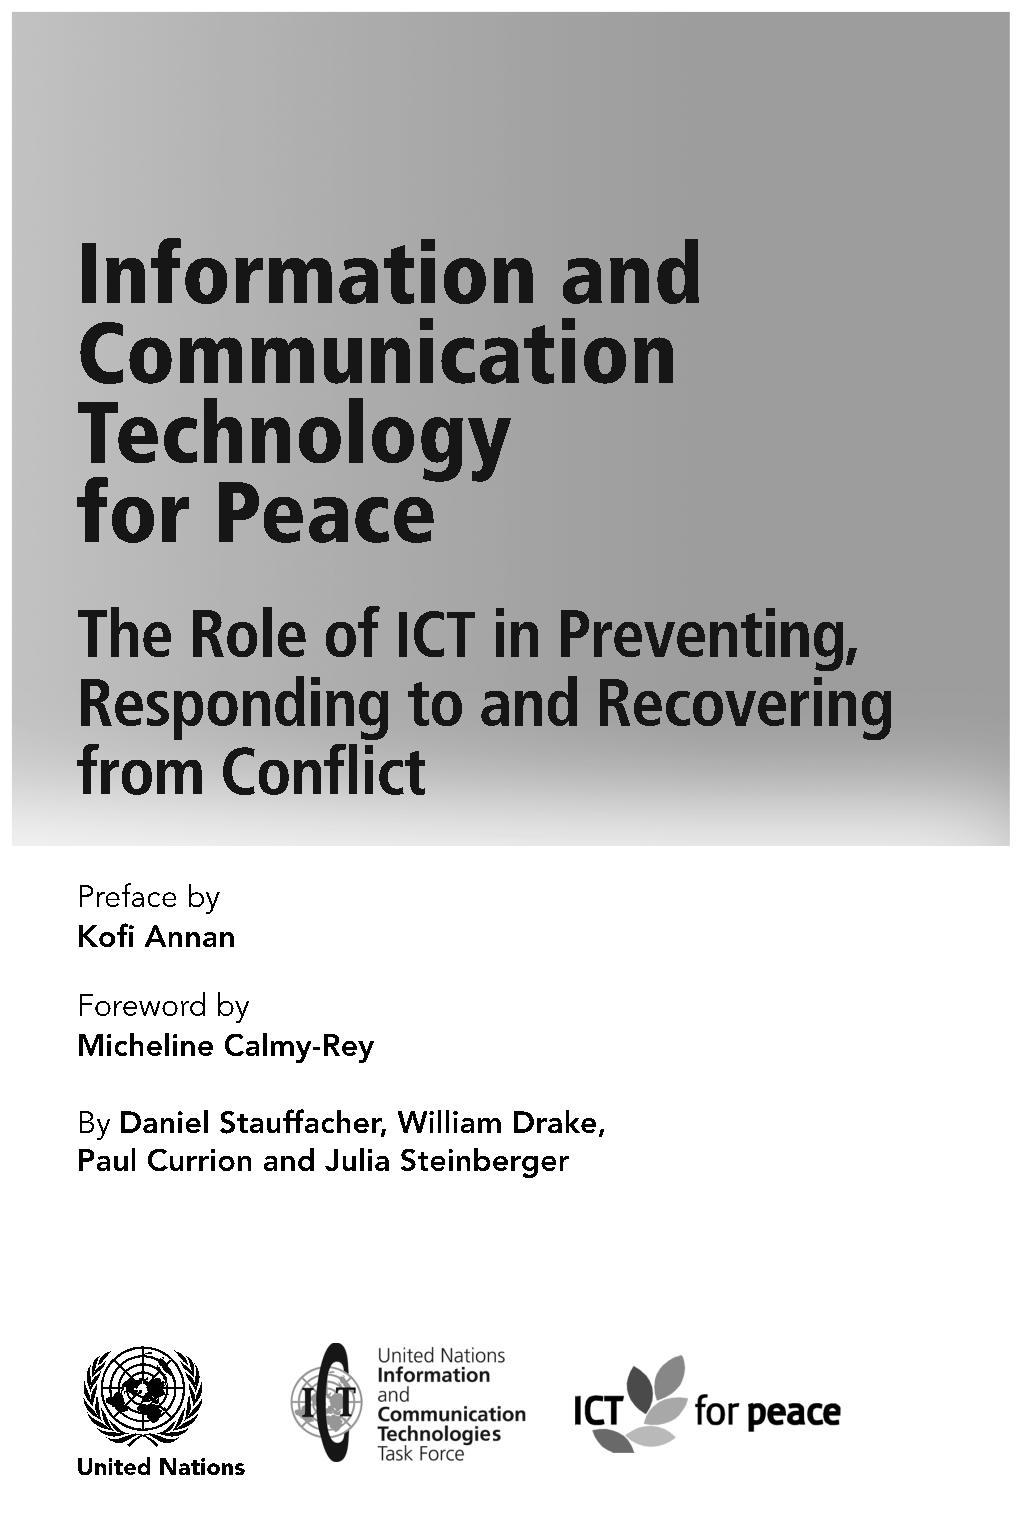 Information and Communication Technology for Peace the Role of ICT in Preventing, Responding to and Recovering from Conflict